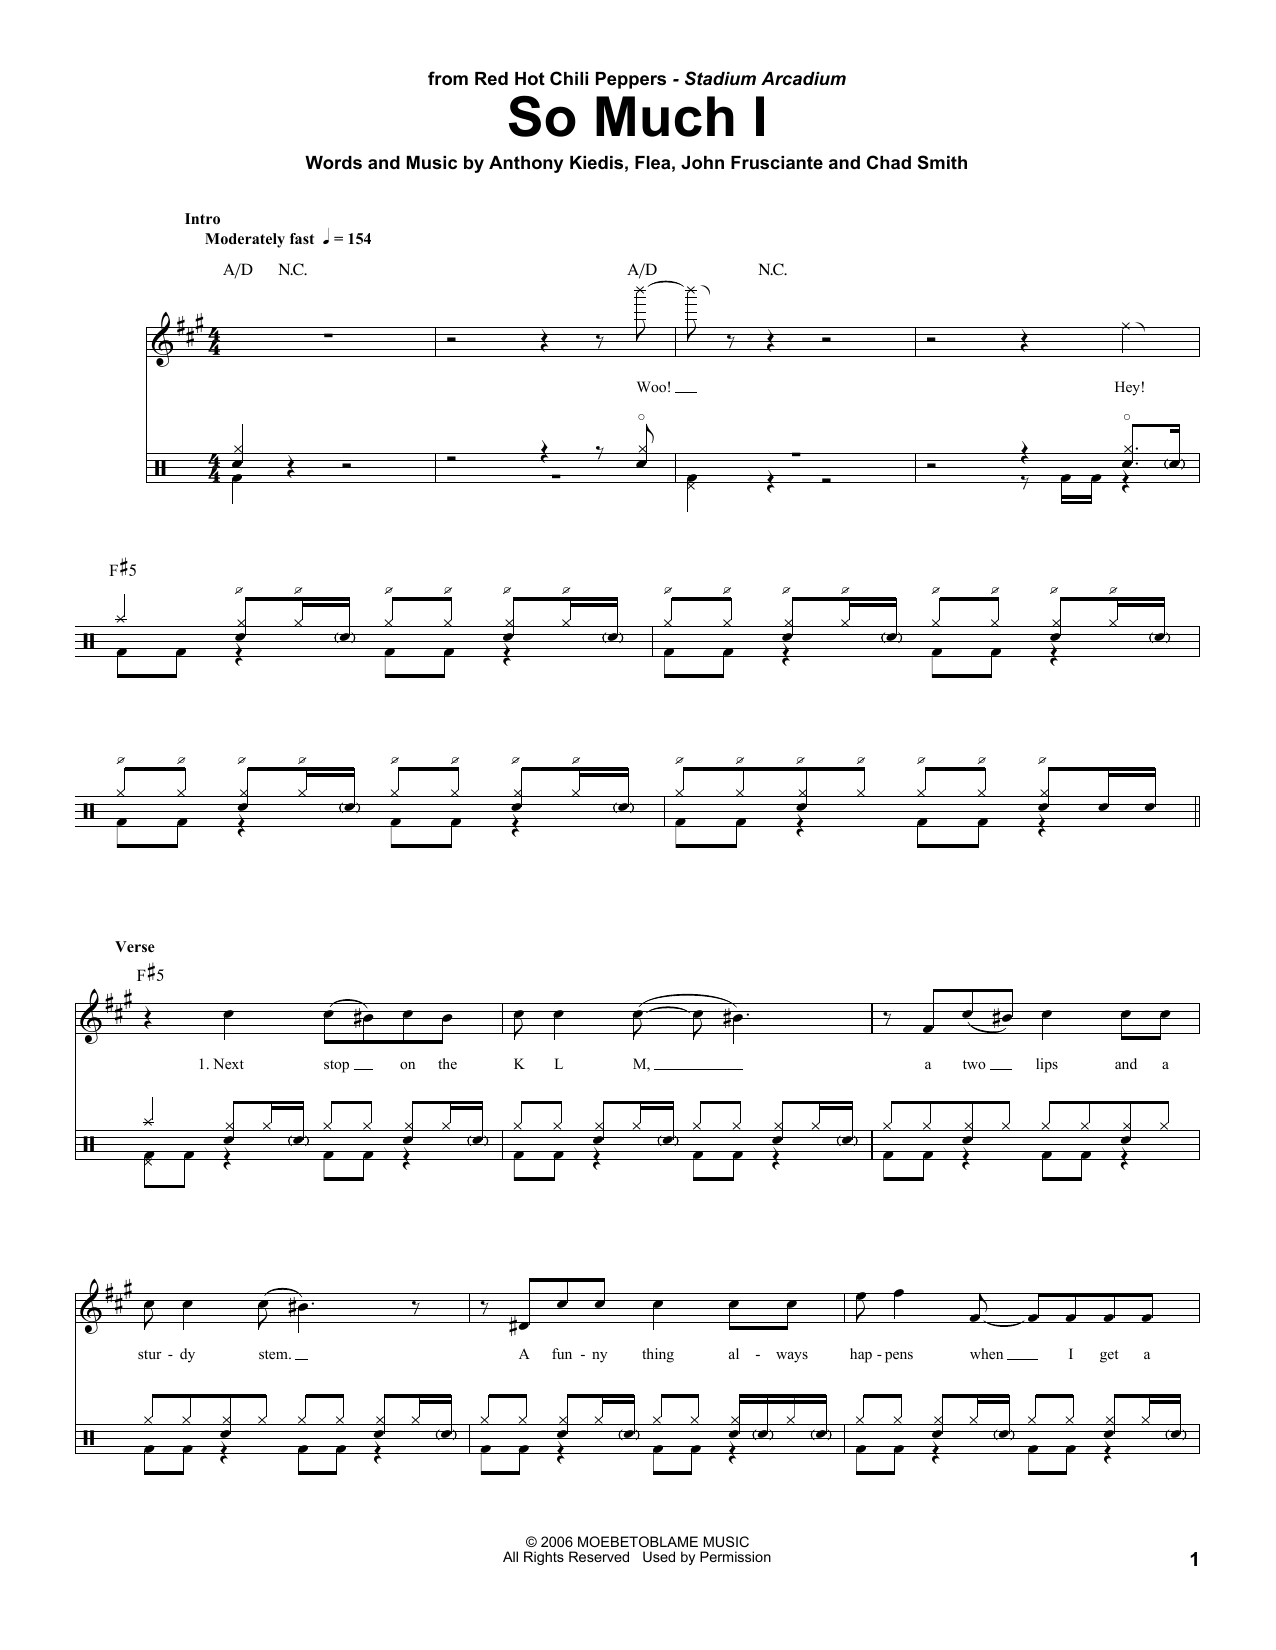 Download Red Hot Chili Peppers So Much I Sheet Music